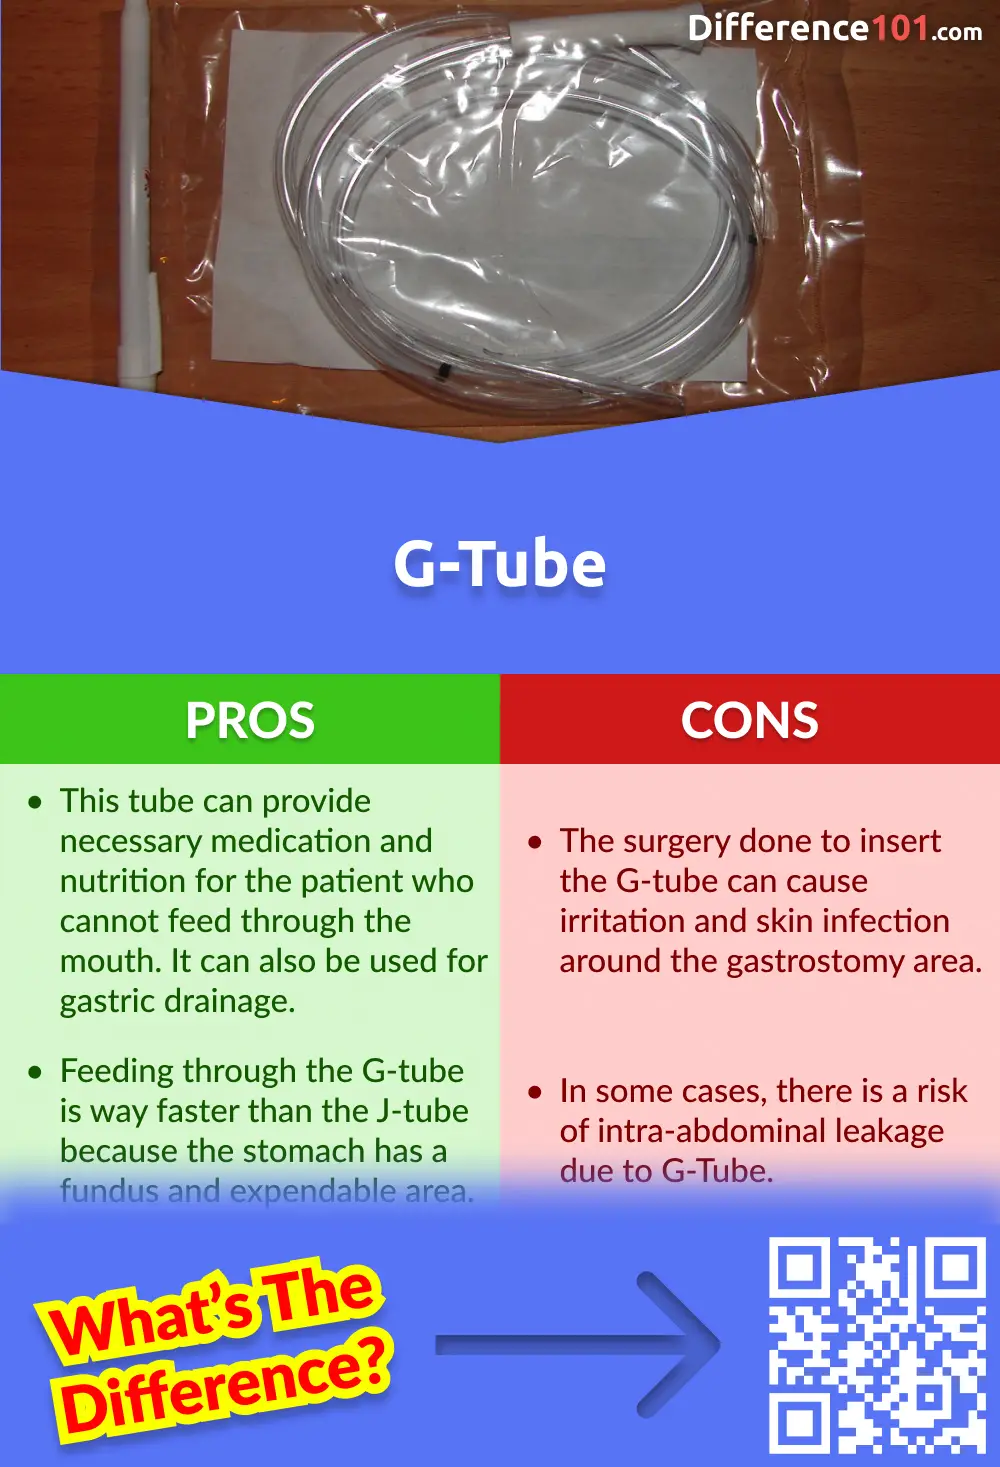 G-tube Pros and Cons
